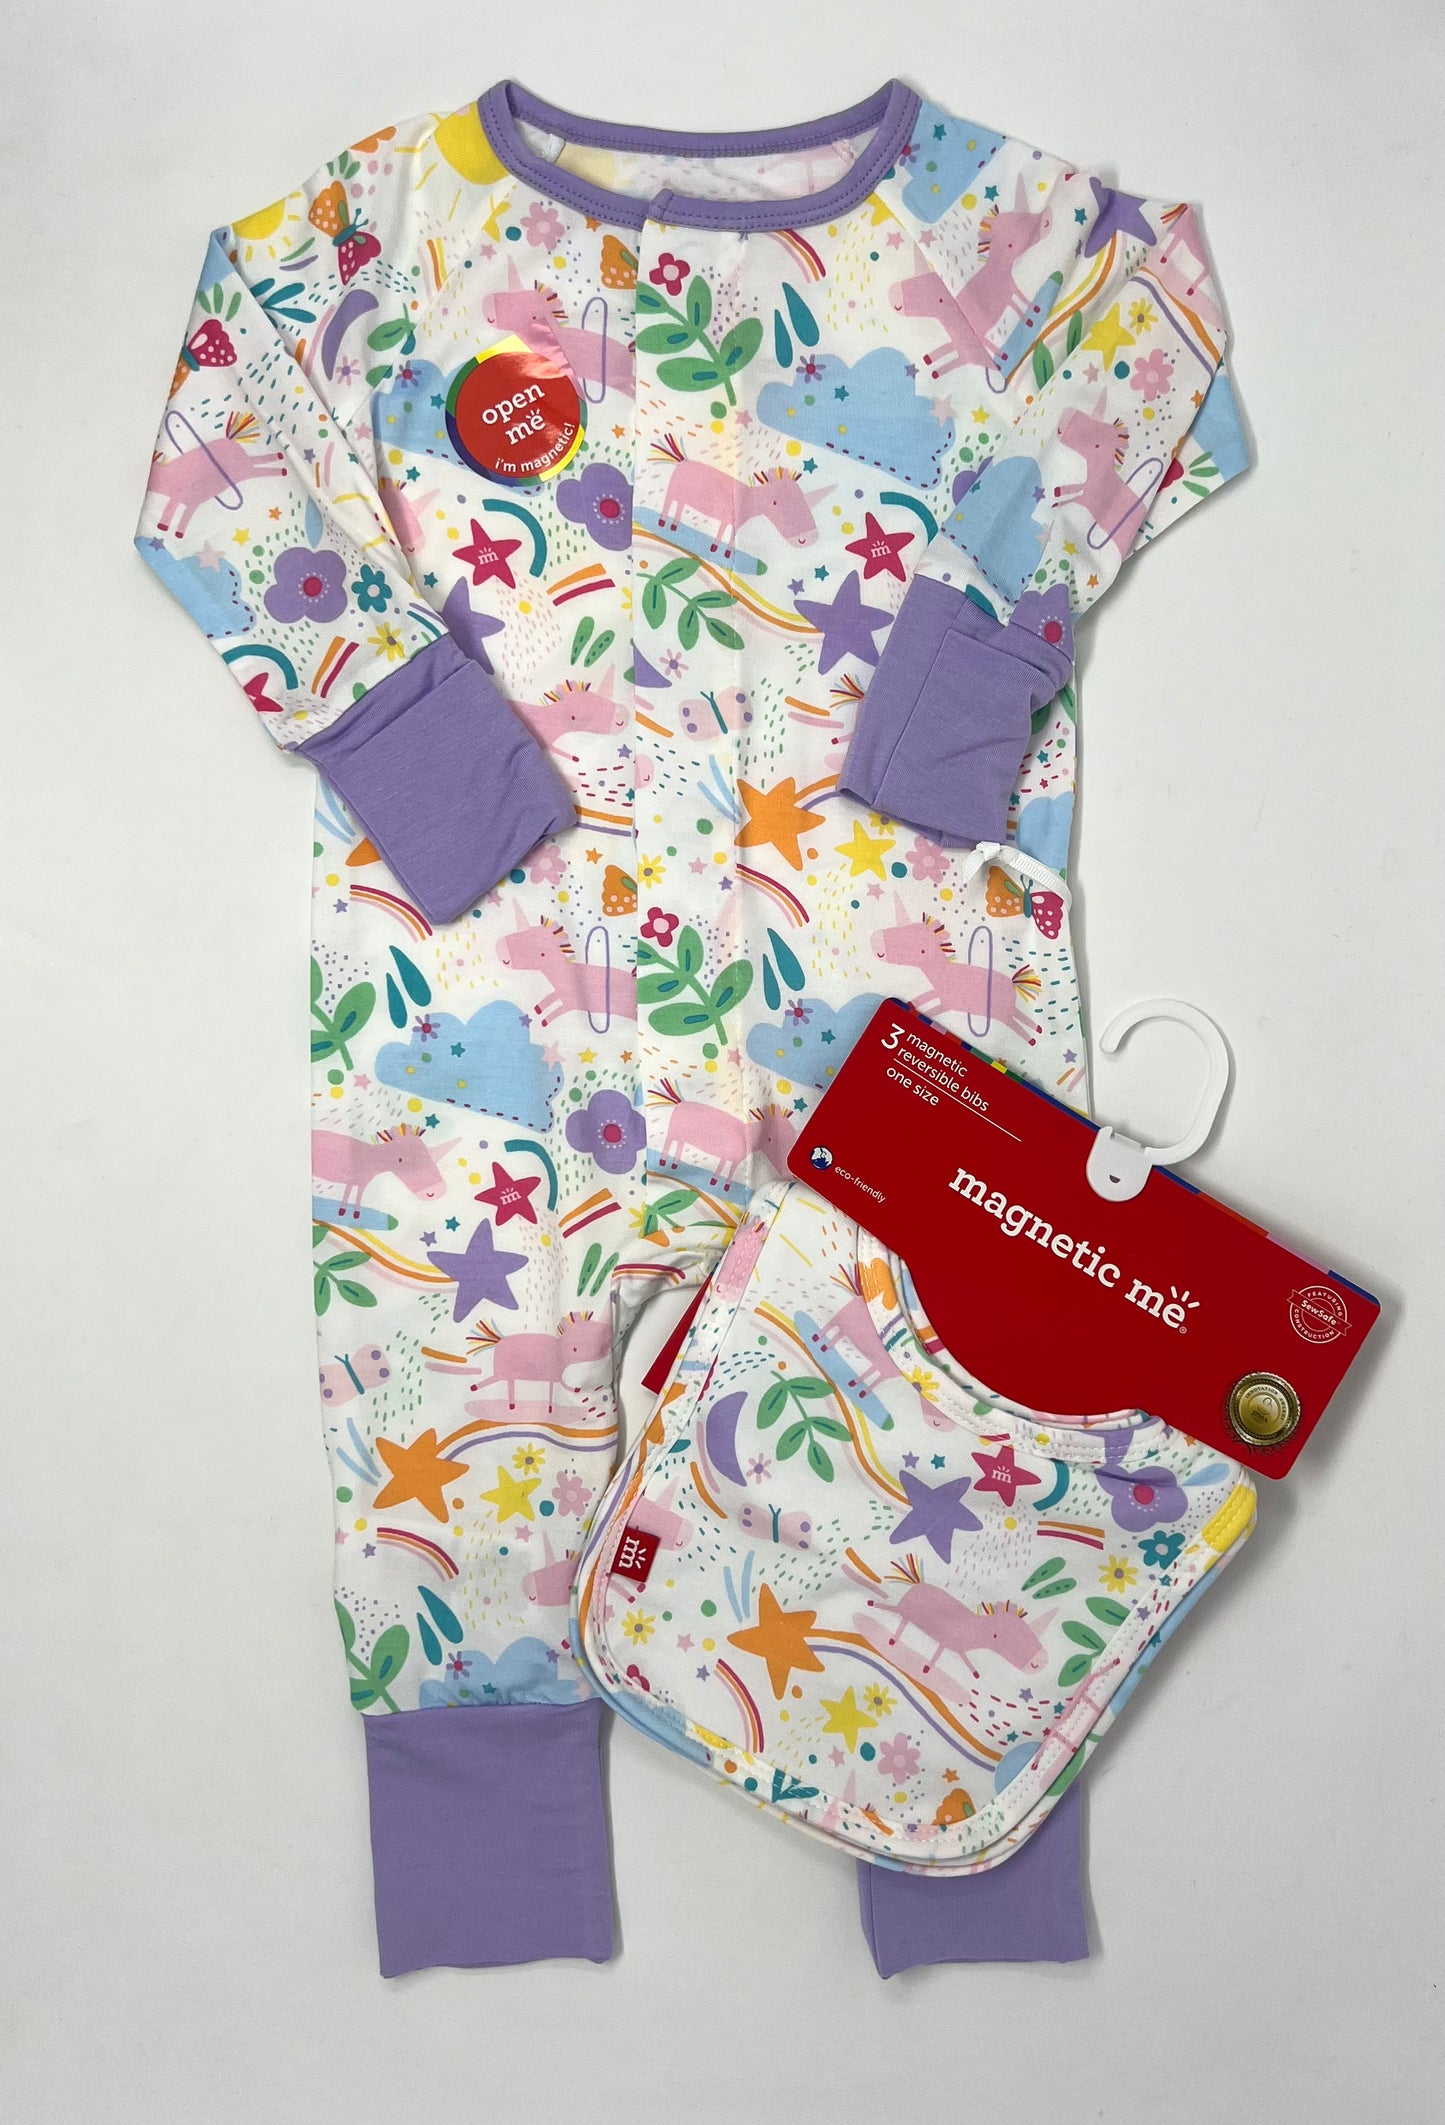 Sunny Vibes Modal Magnetic Convertible Grow w/ Me Coverall Baby Sleepwear Magnetic Me   